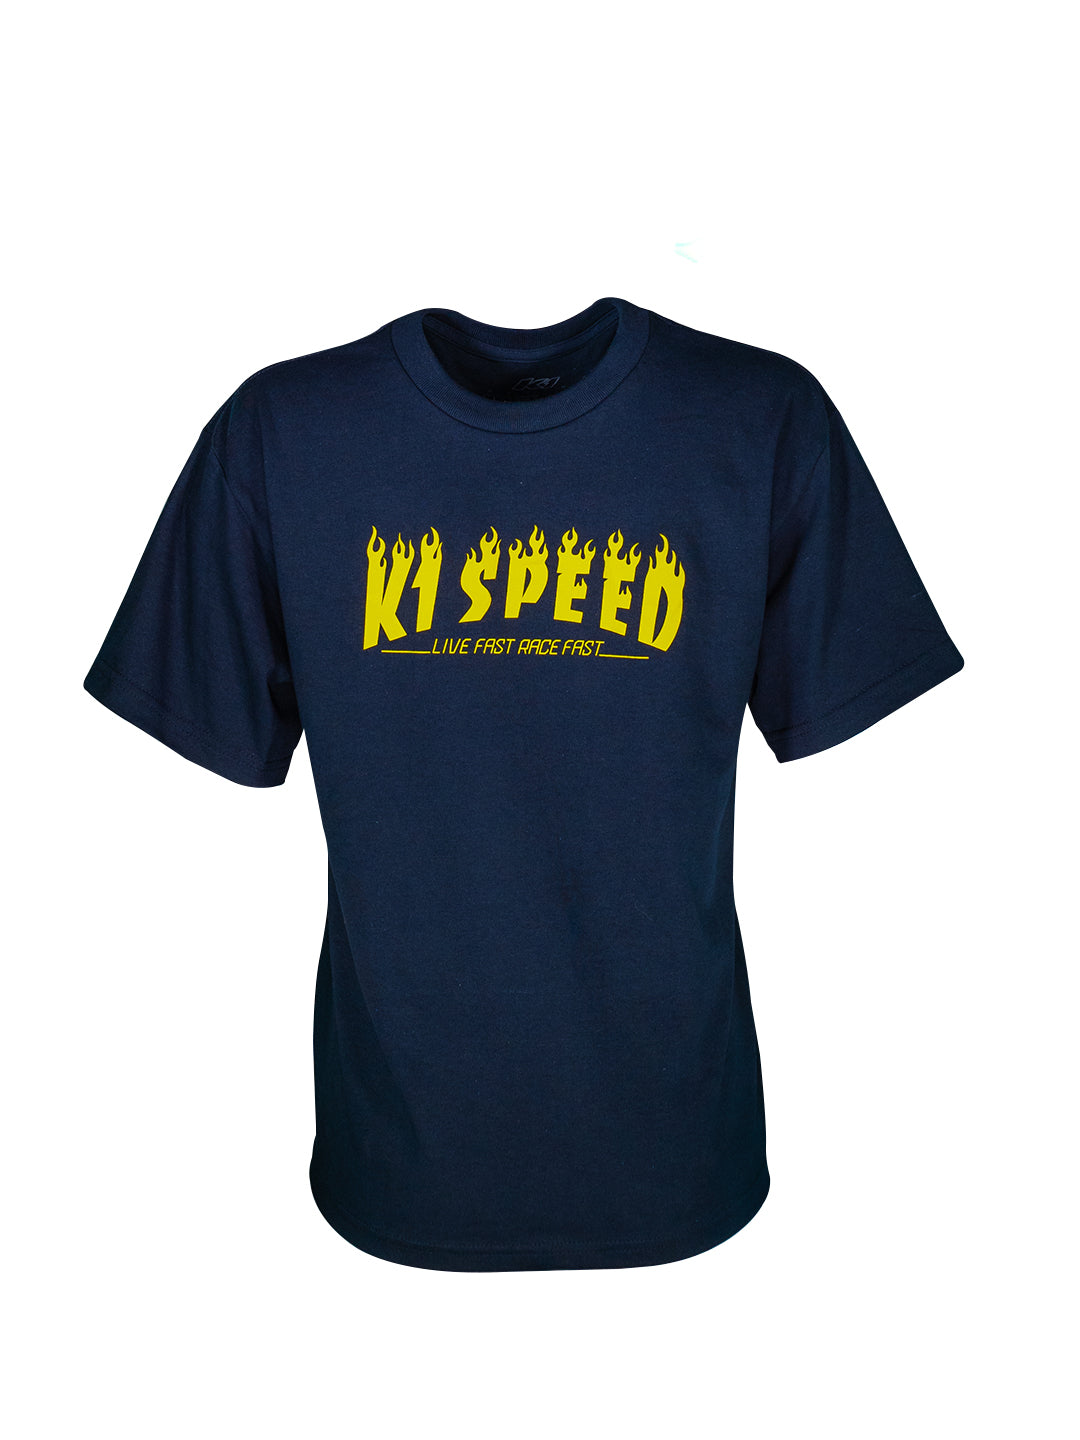 Pure Speed Youth Tee